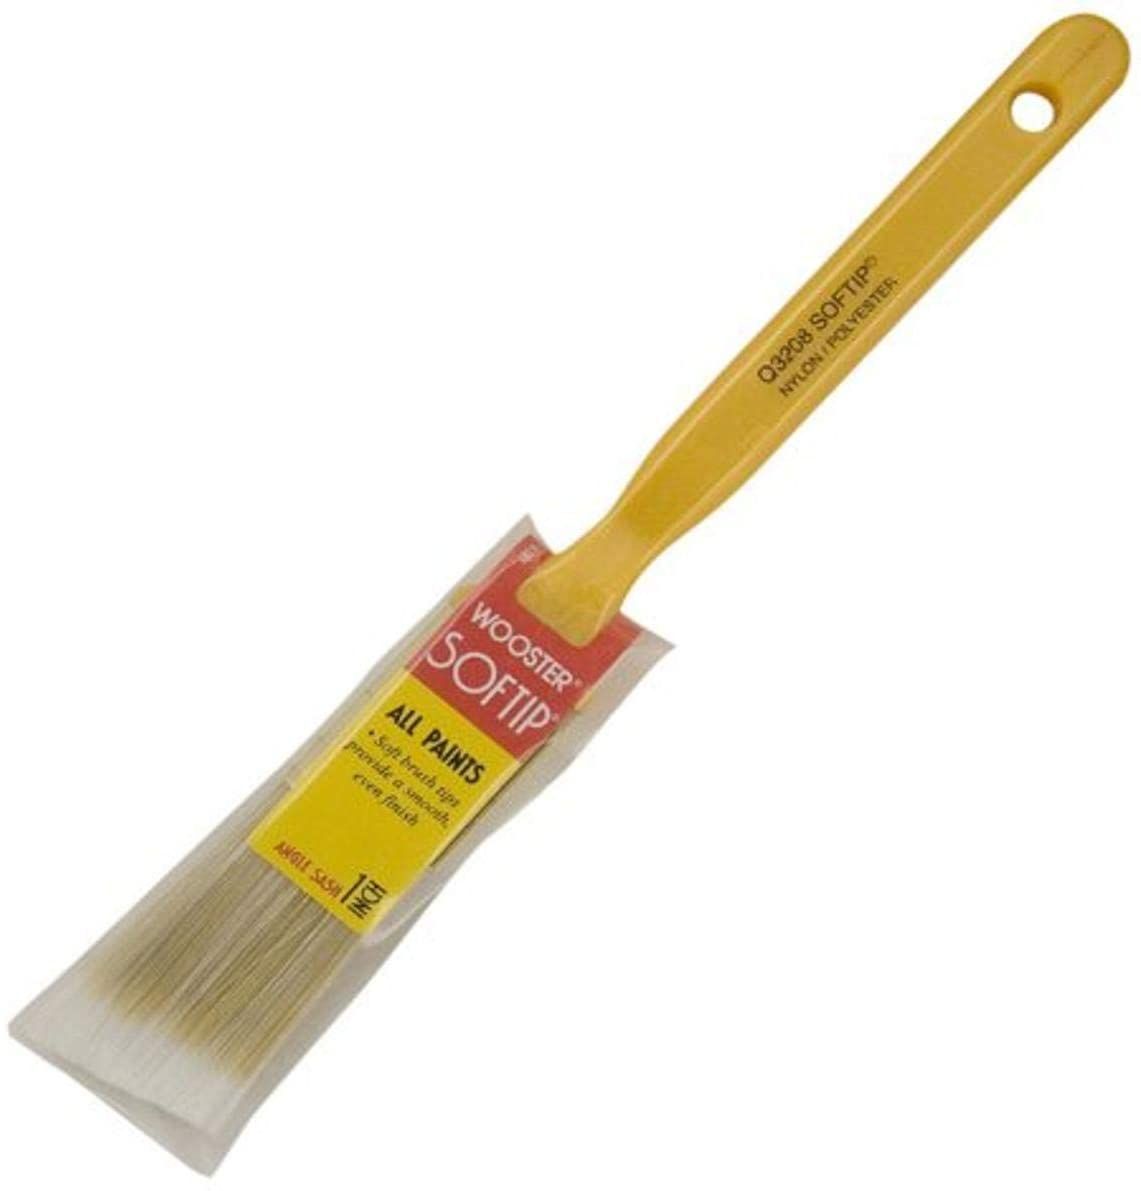 Bates- Paint Brush, 4 Inch, Soft Tip Paint Brushes for Walls, Brushes for  Painting - Bates Choice